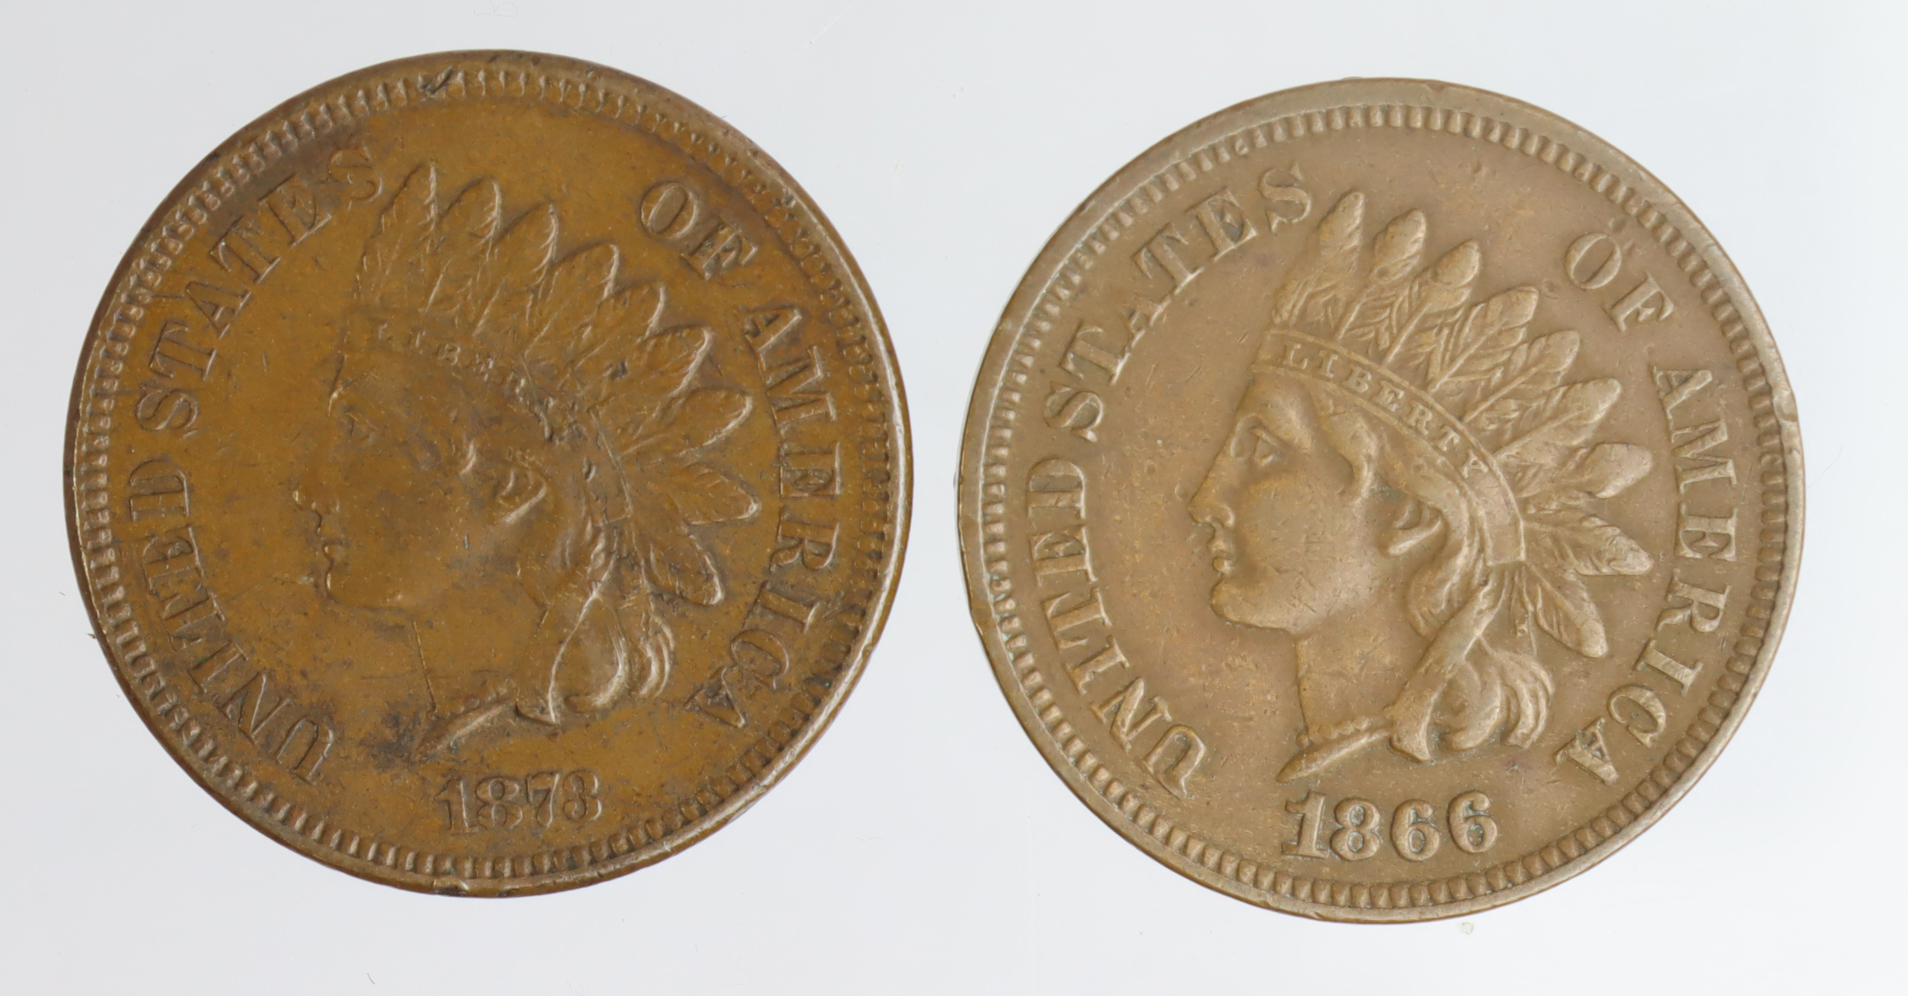 USA Indian Head Cents (2) scarce dates: 1866 VF, and 1873 open 3, VF